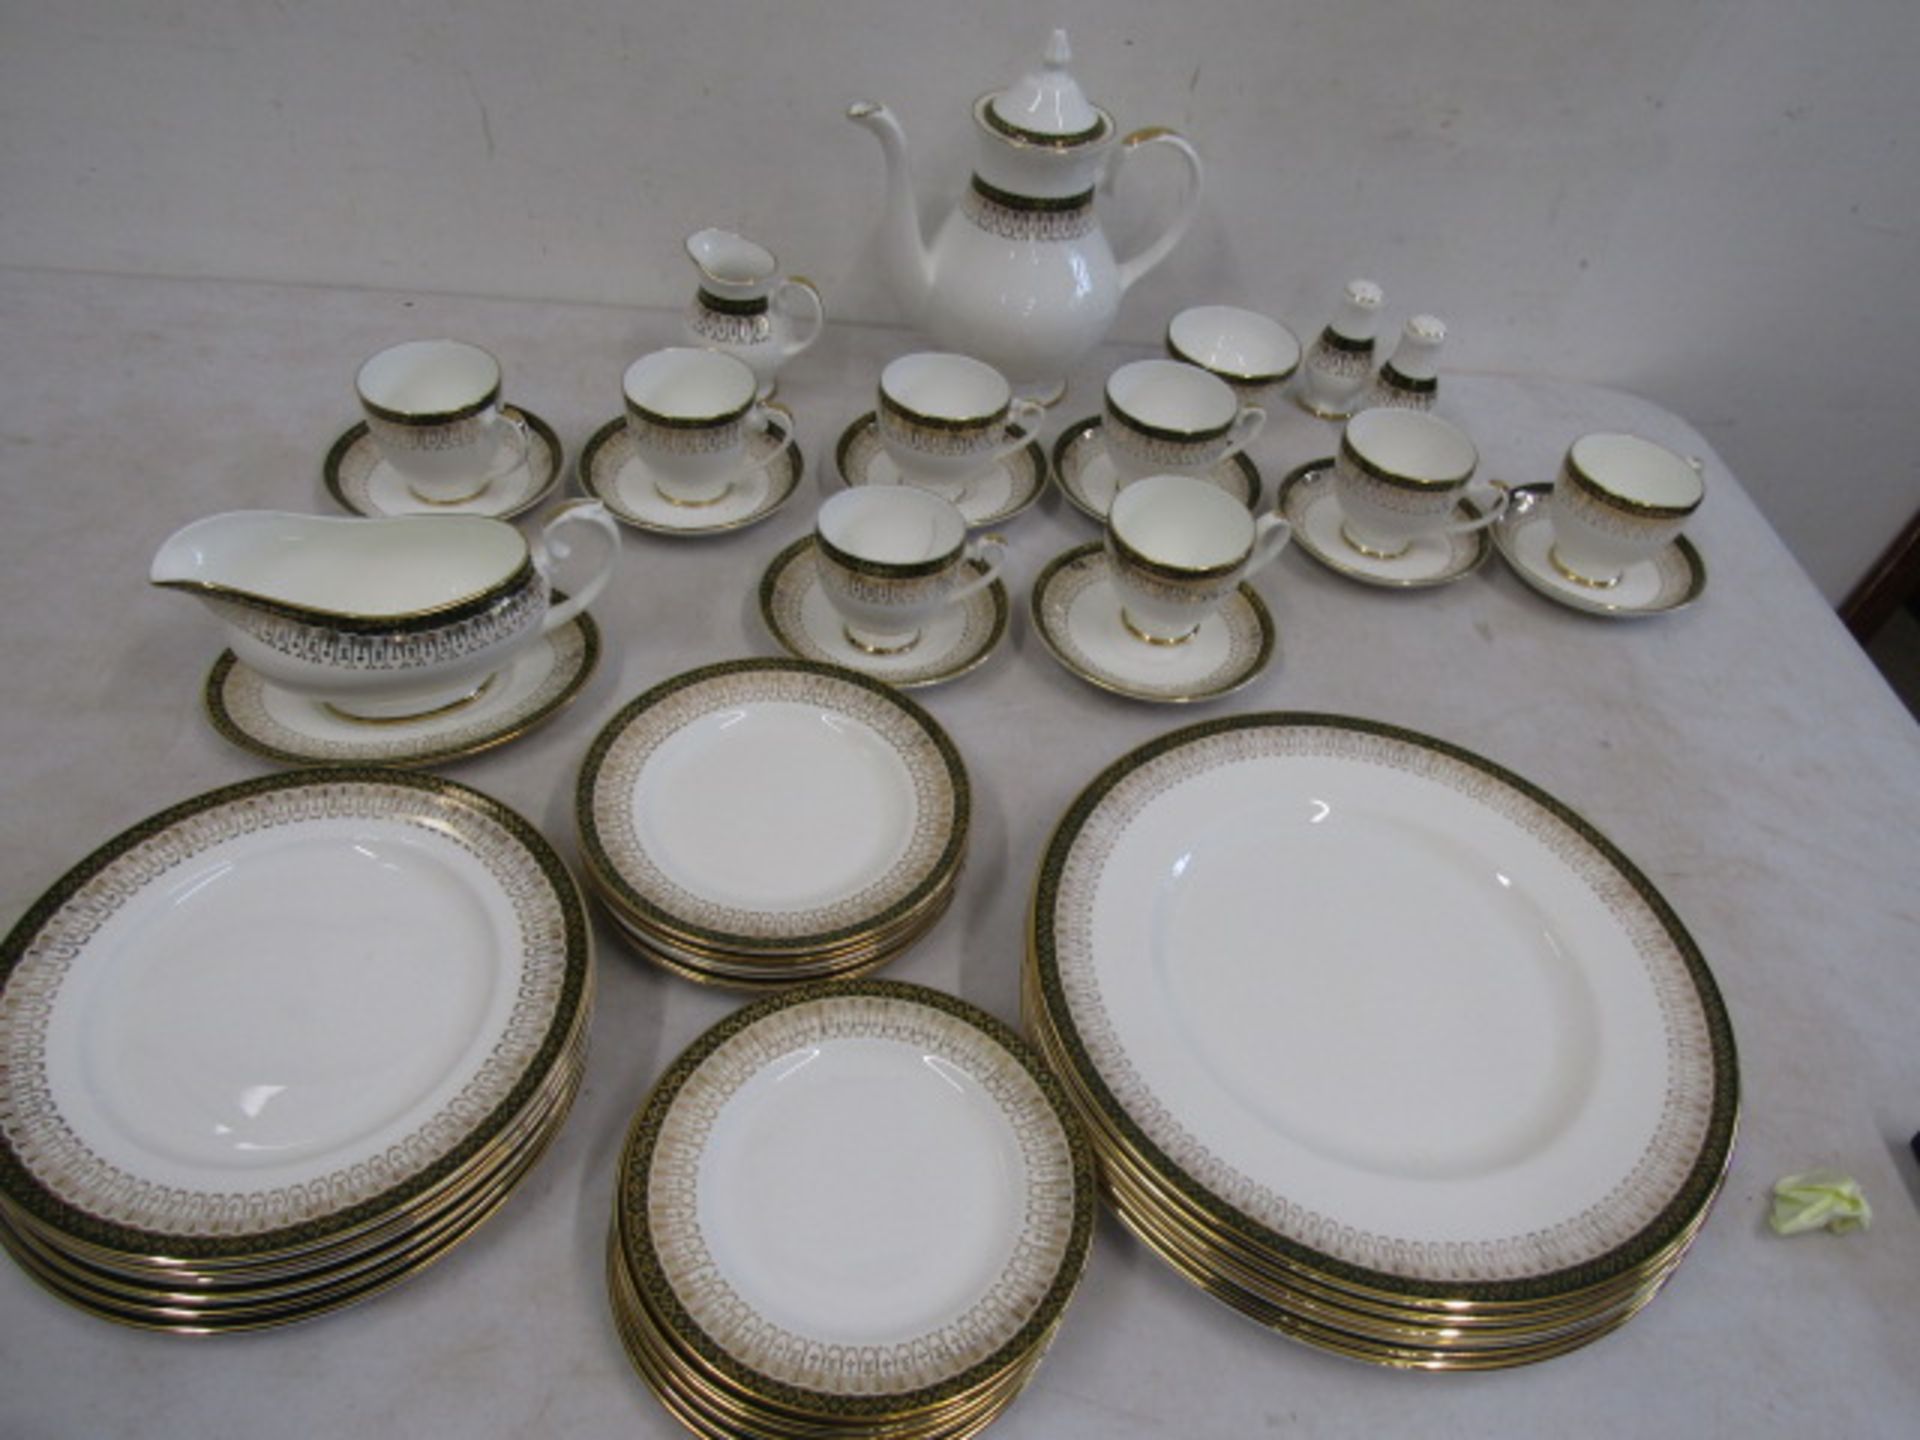 Royal Doulton 'Majestic' dinner service for 6